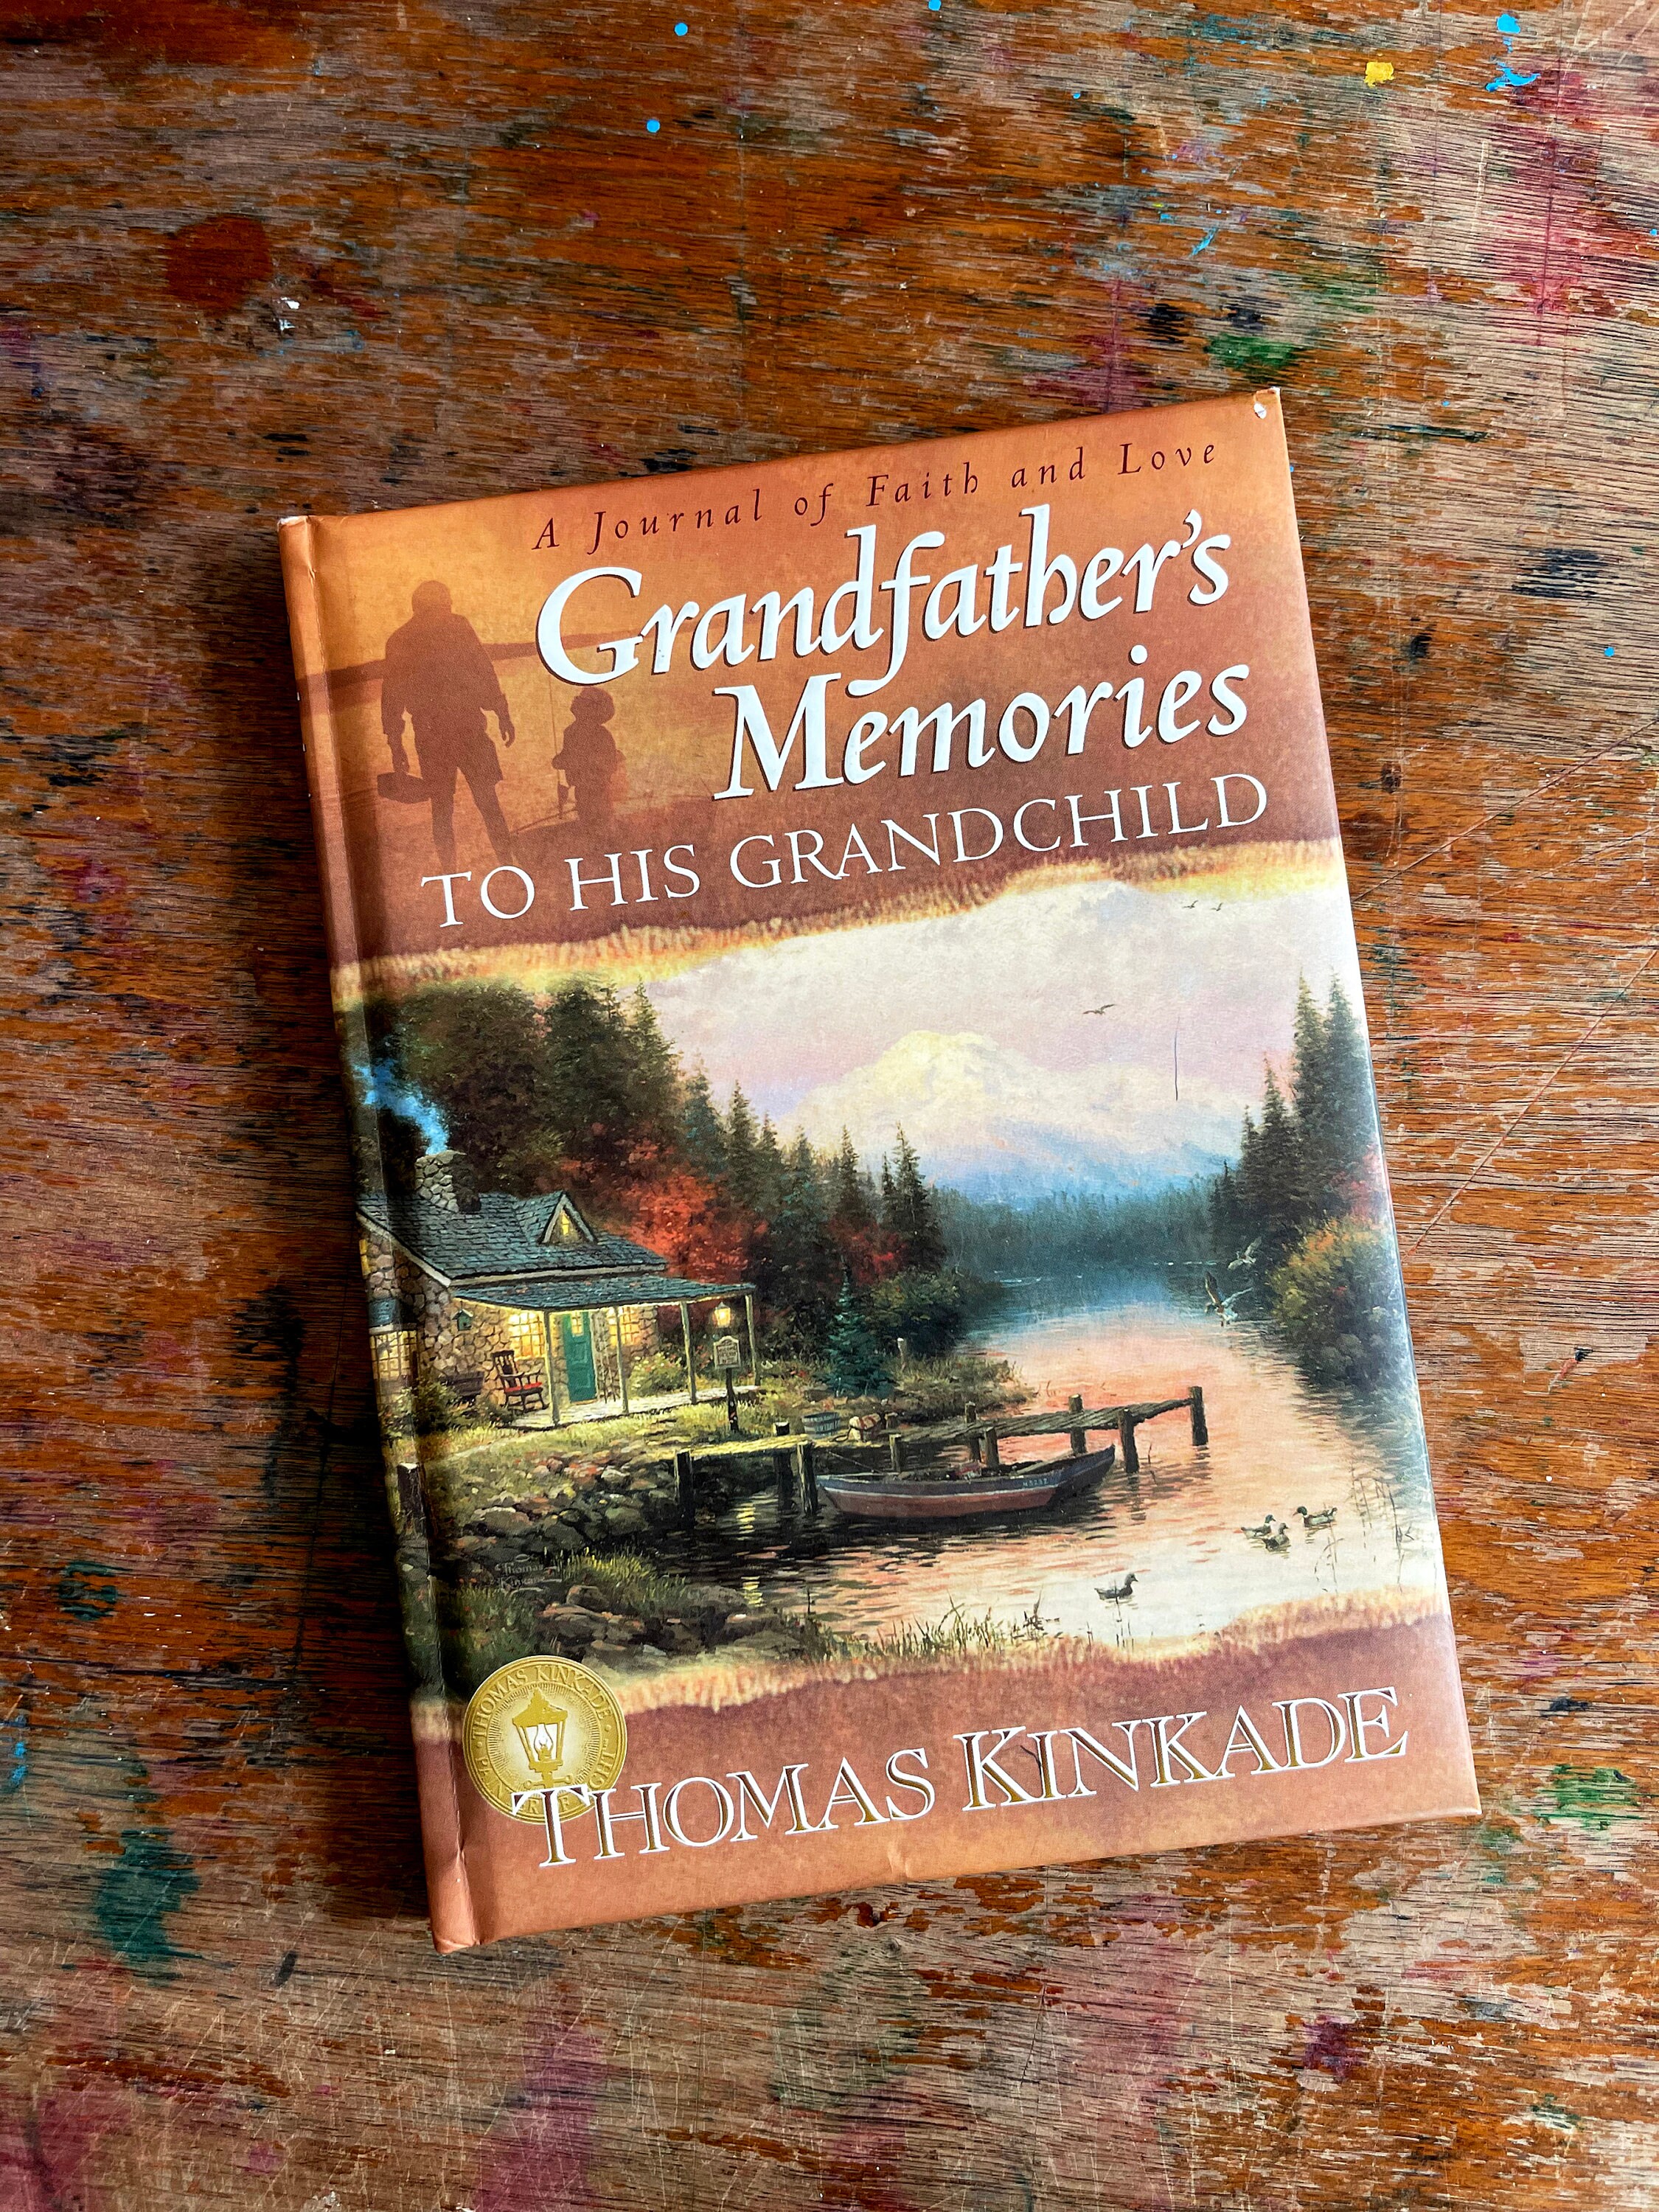 Family Tree Book for up to 12 Generations, 235pg Paperback Gift for Mom Dad  Grandma Grandpa Aunts and Uncles 